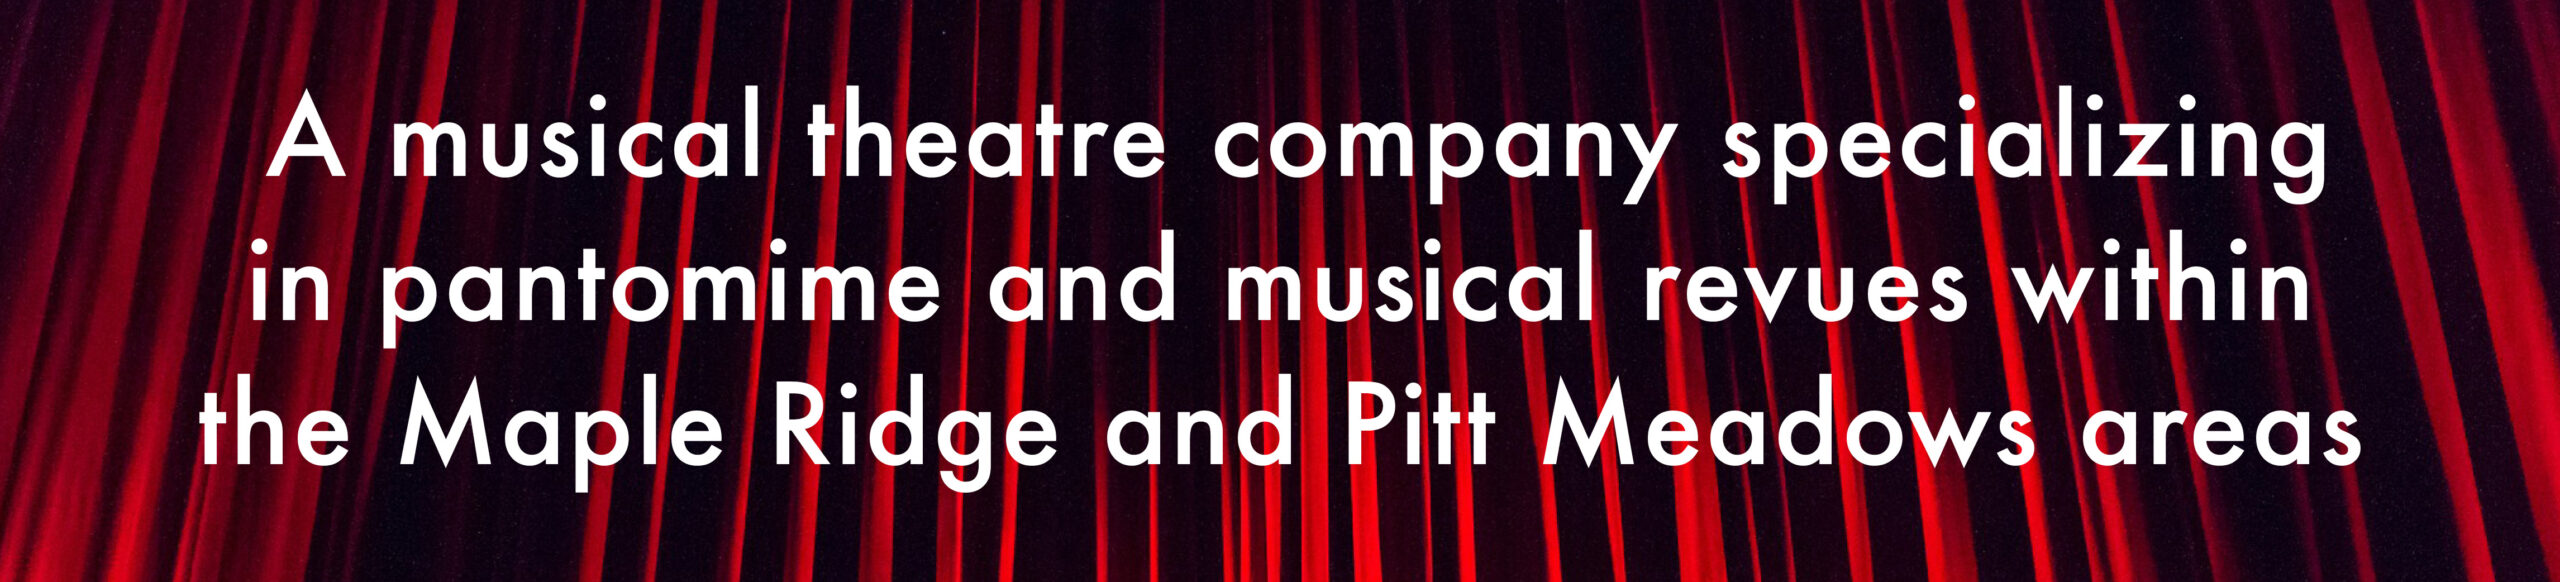 A musical theatre company specializing in pantomime and musical revues within the Maple Ridge and Pitt Meadows areas.